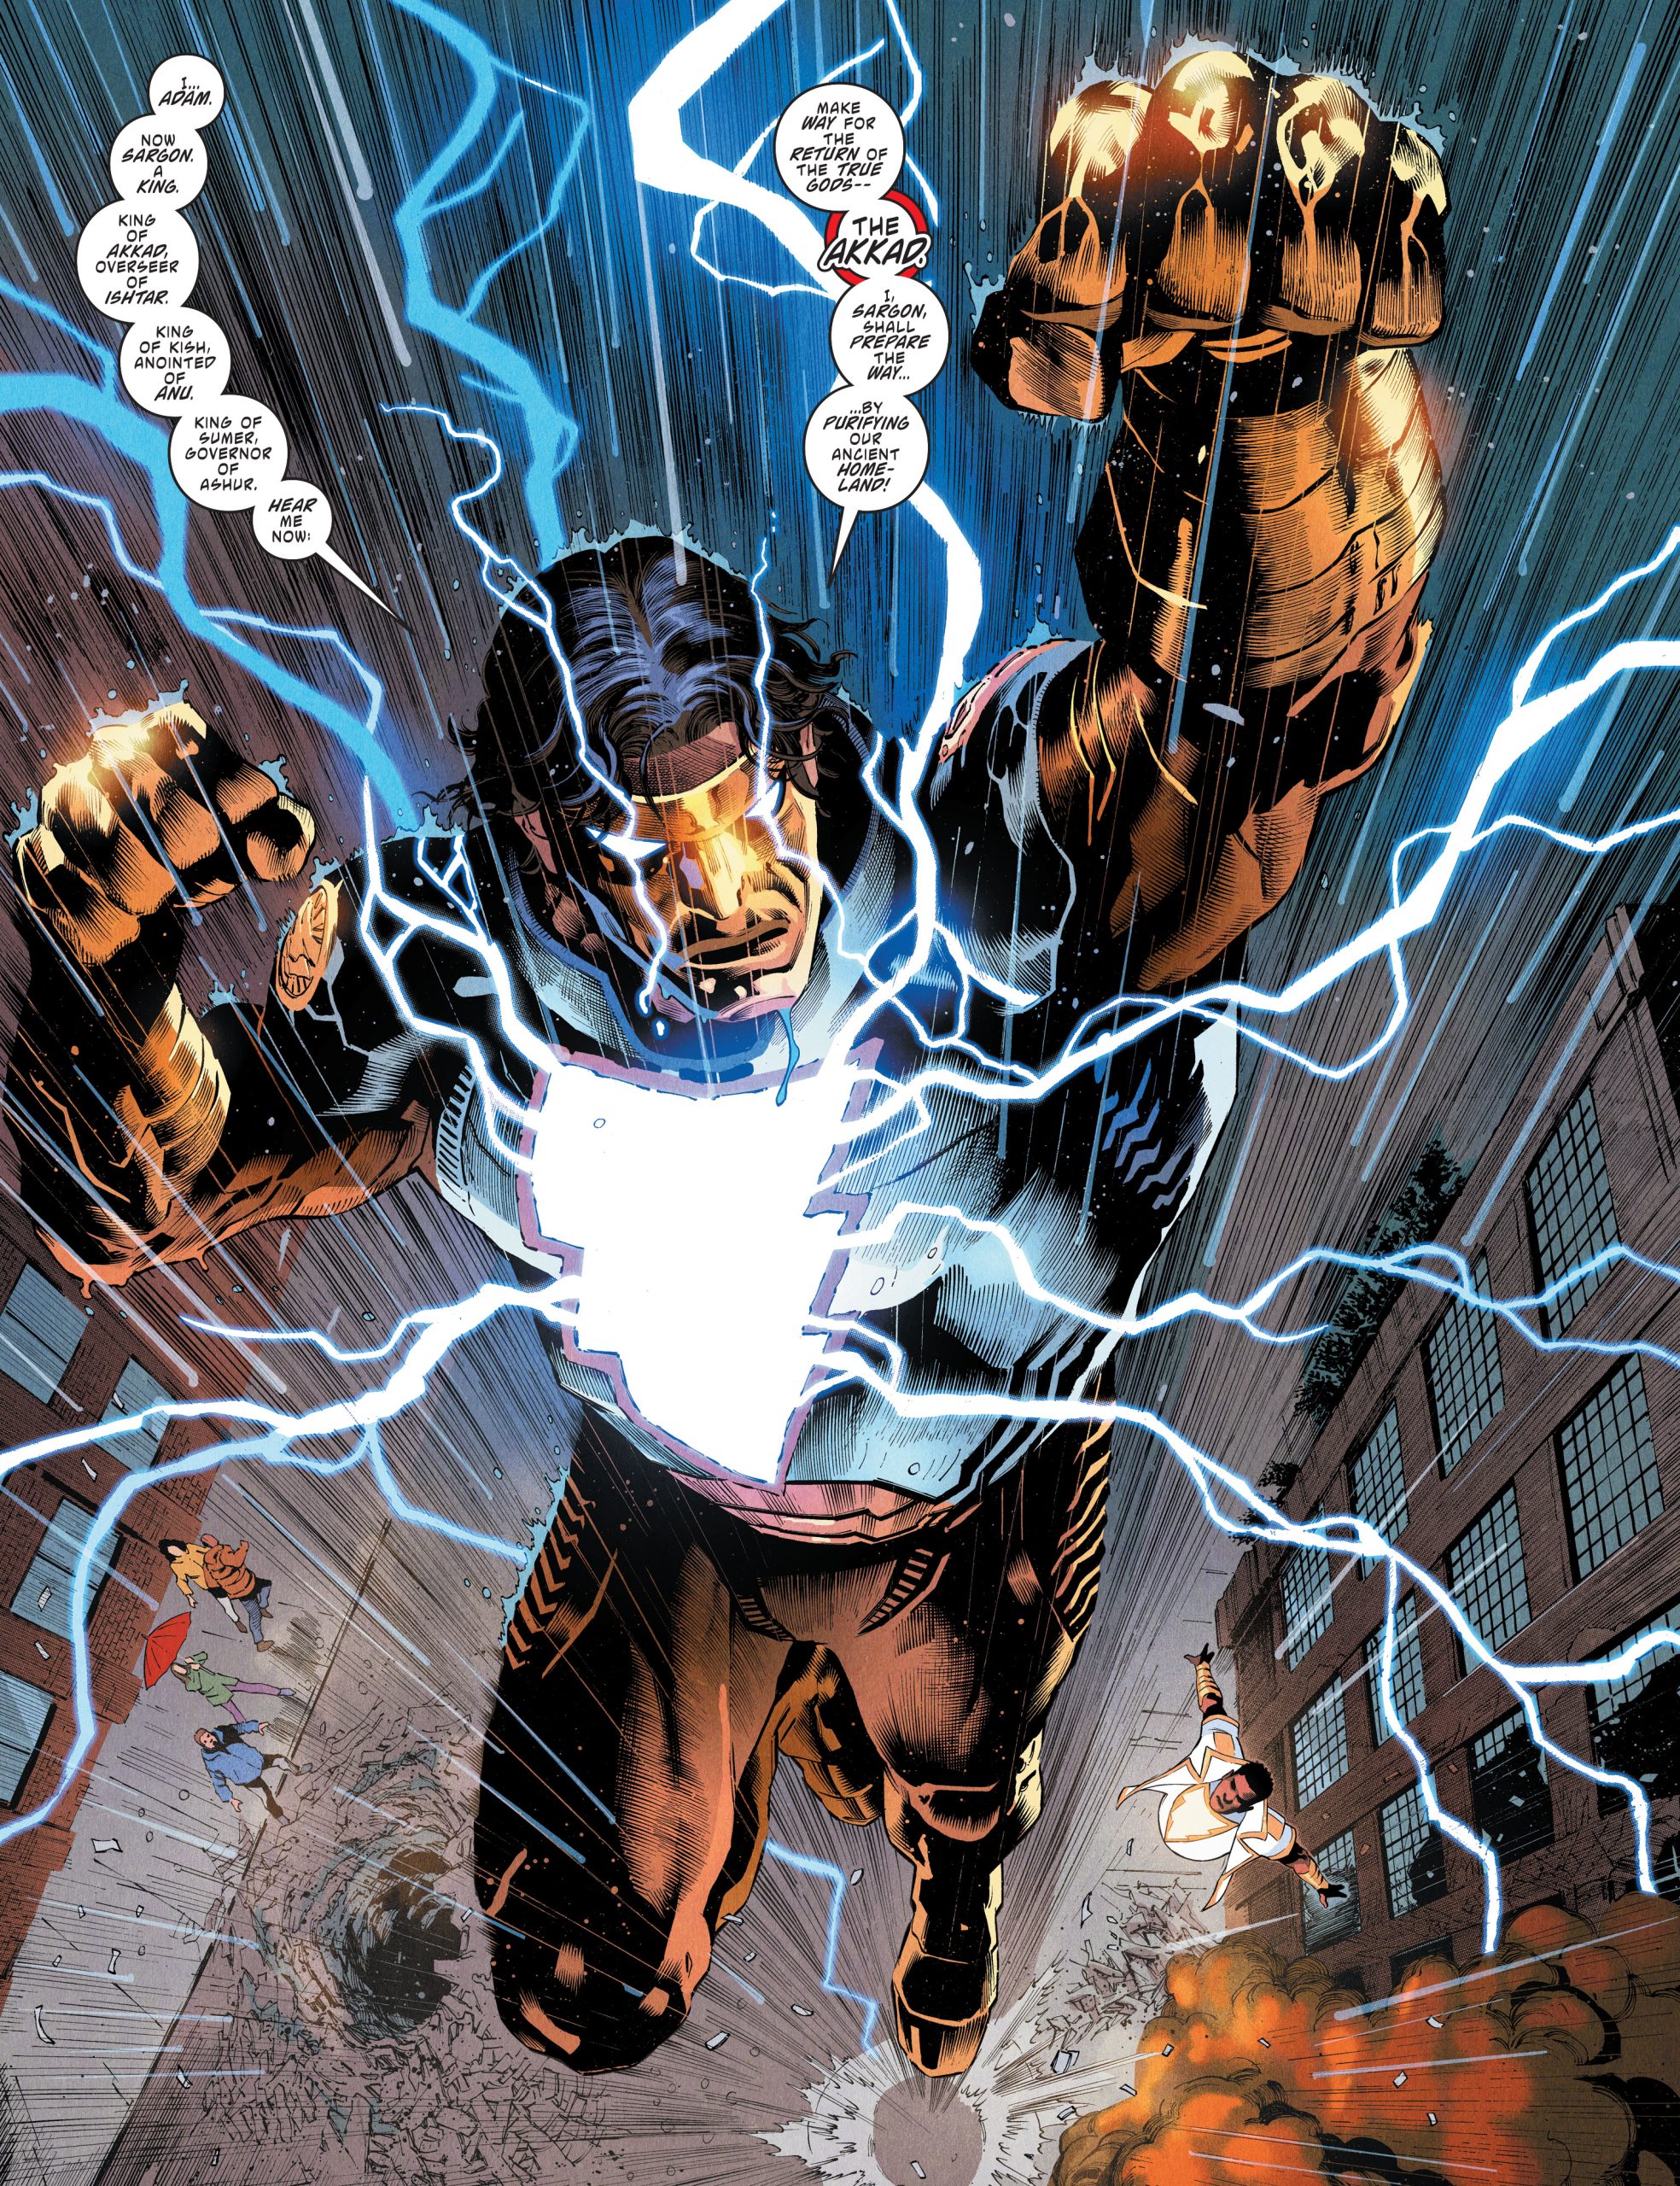 Black Adam is not your usual superhero fare